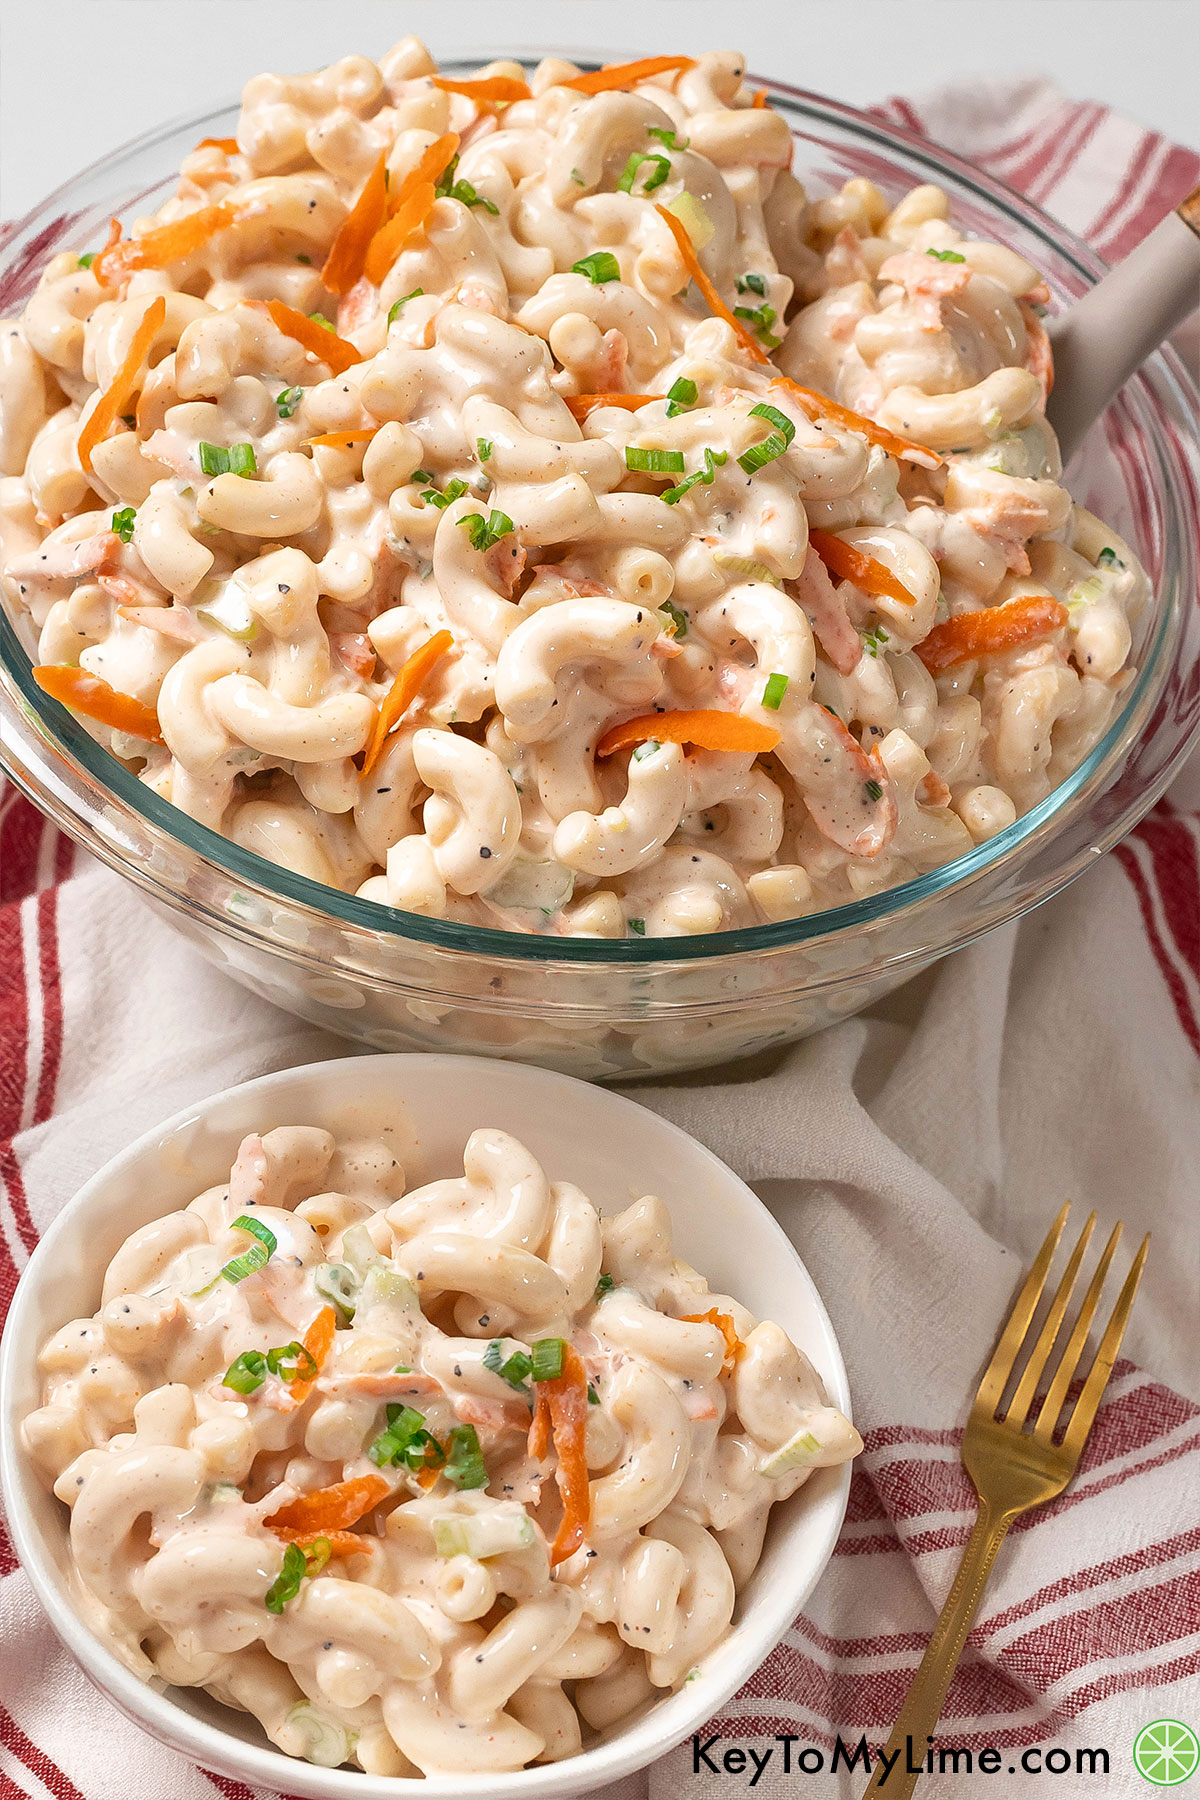 An angled shot of a large mound of flavorful macaroni salad in a glass ditch with carrots and green onion throughout.